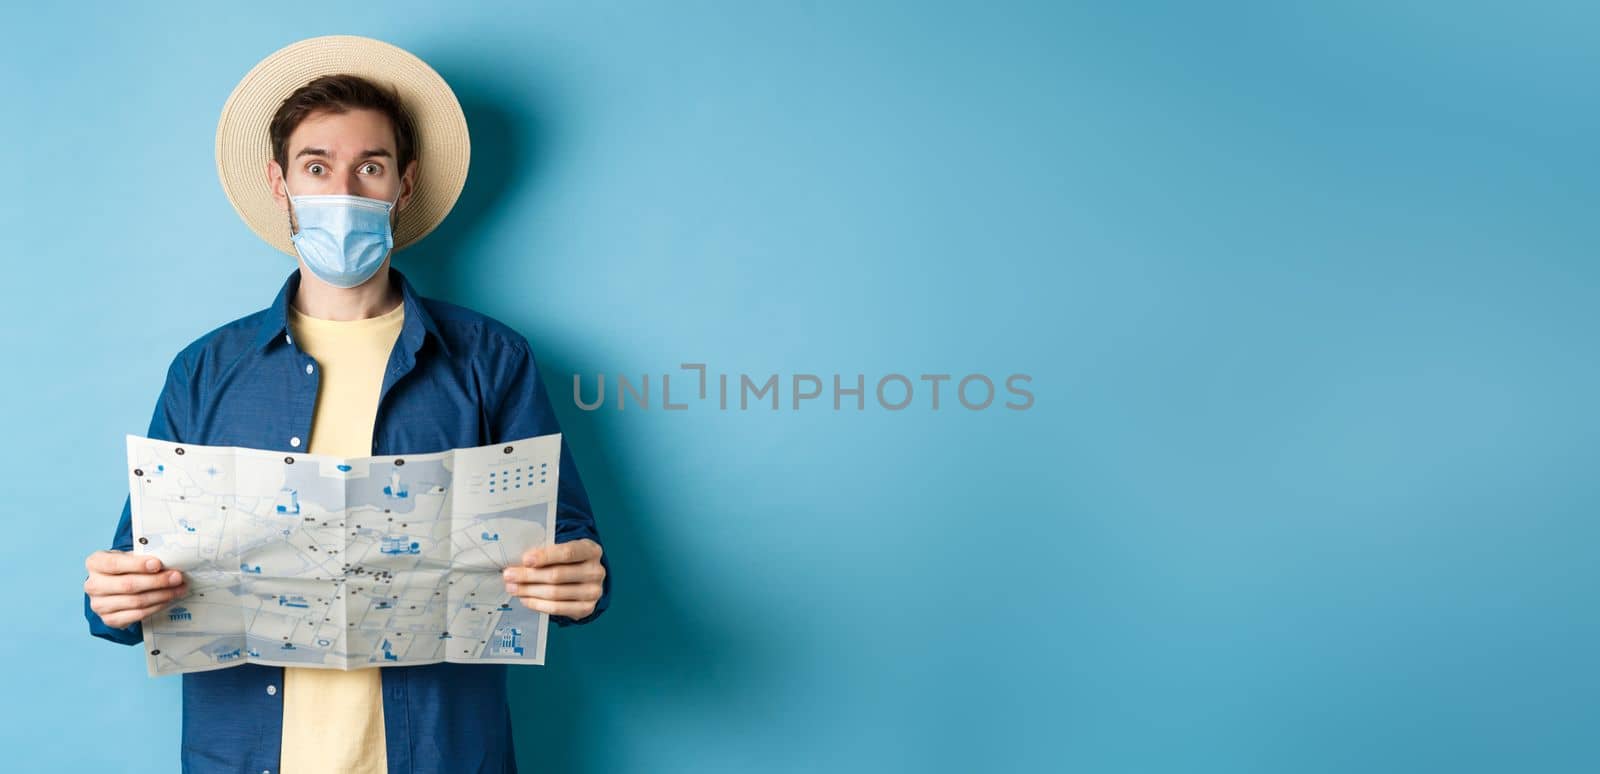 Covid-19, pandemic and travel concept. Tourist in medical mask look surprised, holding map, standing on blue background.